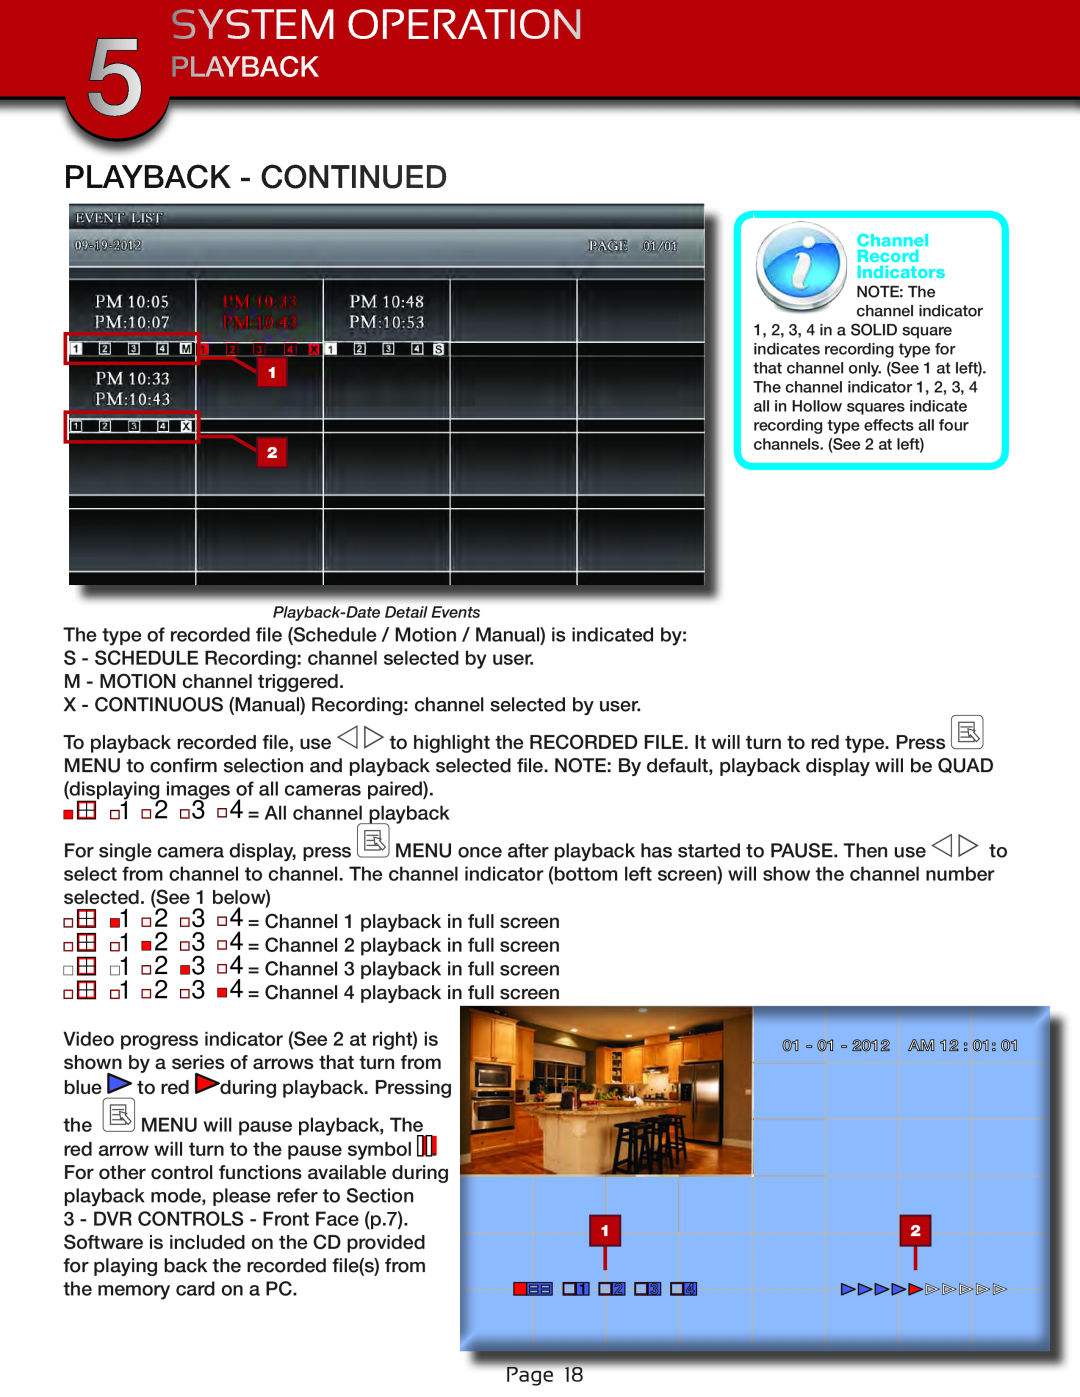 First Alert DWS-472, DWS-471 user manual Playback - Continued, System Operation 